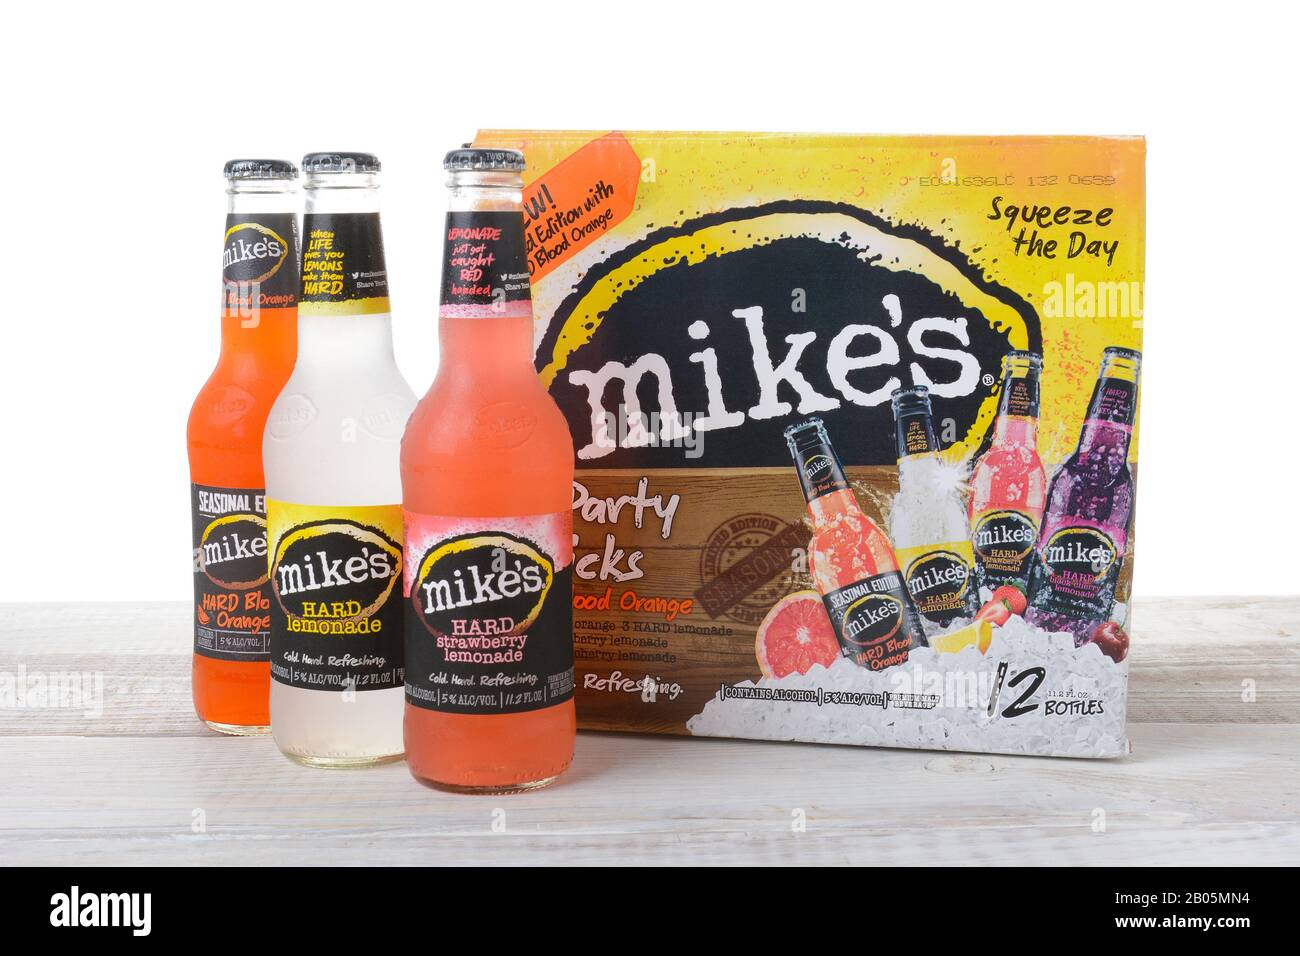 IRVINE, CA - AUGUST 15, 2016: Twelve pack of Mikes Hard Lemonade. Mikes produces a line of alcoholic lemonades in various fruit flavors. Stock Photo